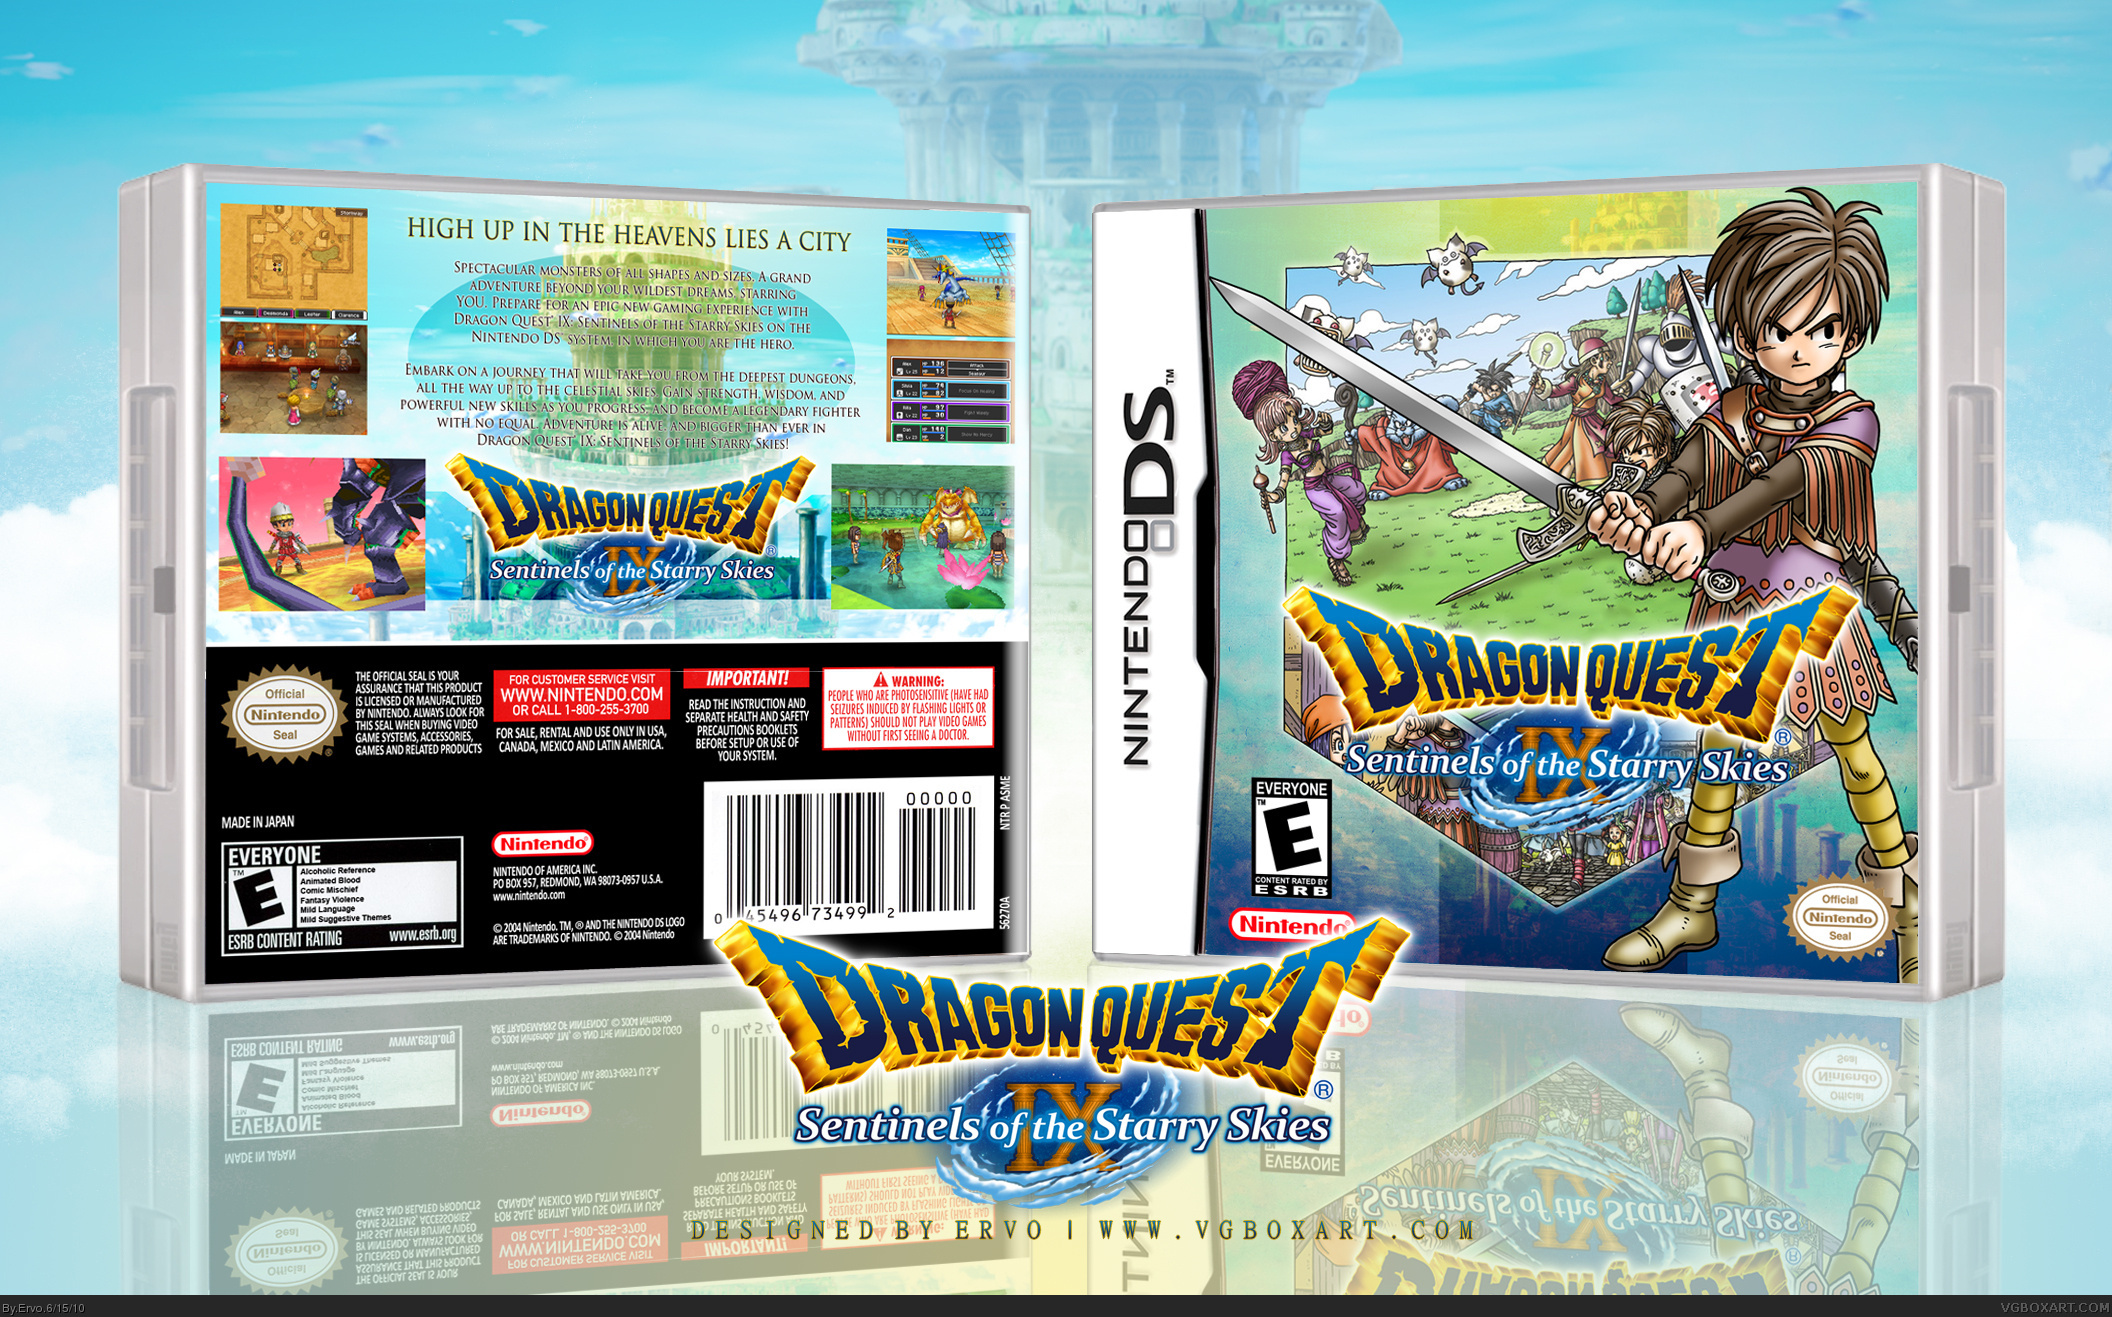 Dragon Quest IX: Sentinels of the Starry Skies box cover